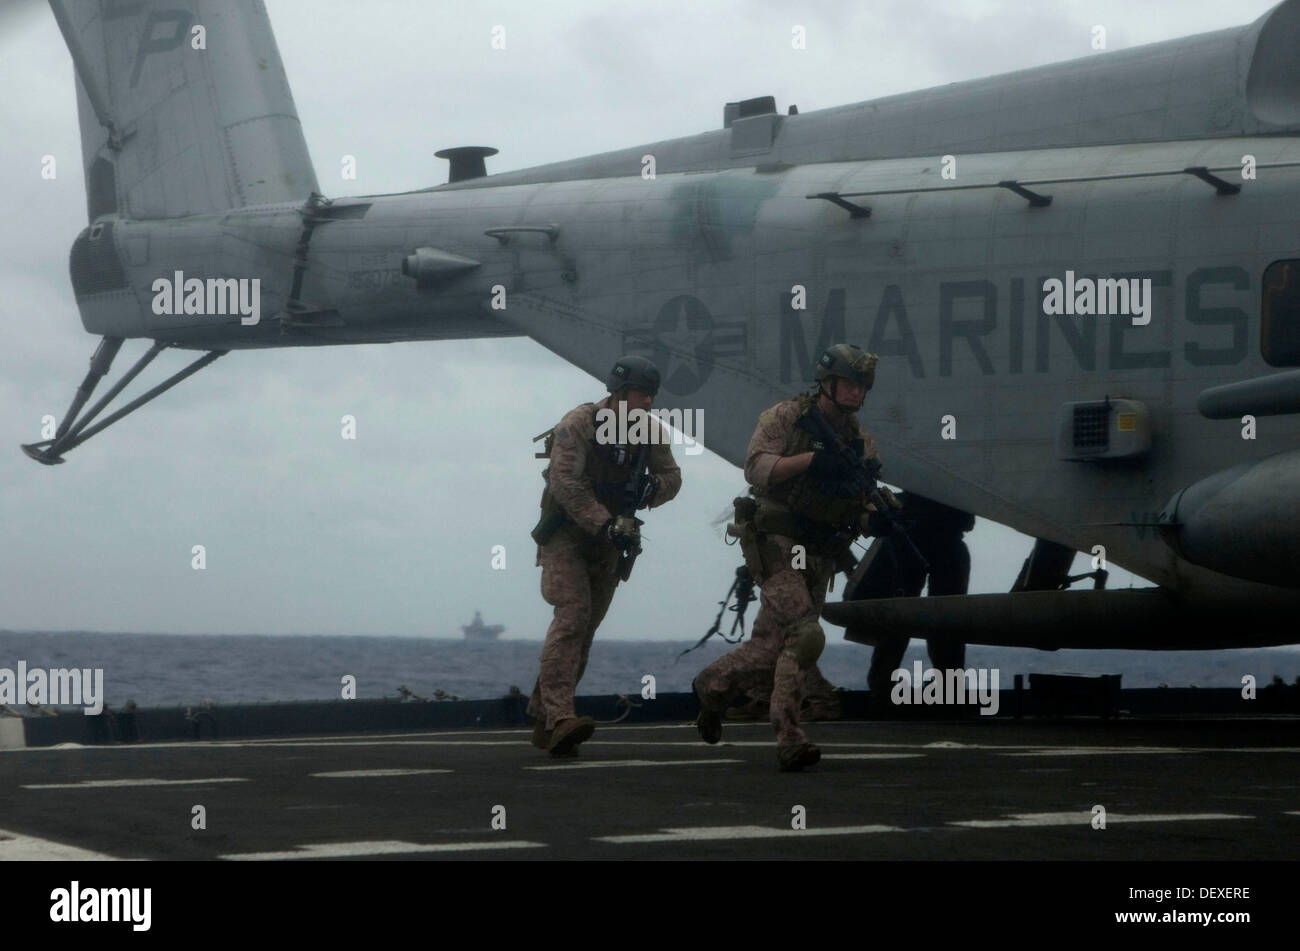 U.S. Marines with Command Element, 31st Marine Expeditionary Unit(MEU) board the USNS Rappahannock during a Visit Board Search and Seizure(VBSS) exercise, at sea, September 15, 2013. The 31st MEU regularly performs amphibious training such as the VBSS to Stock Photo